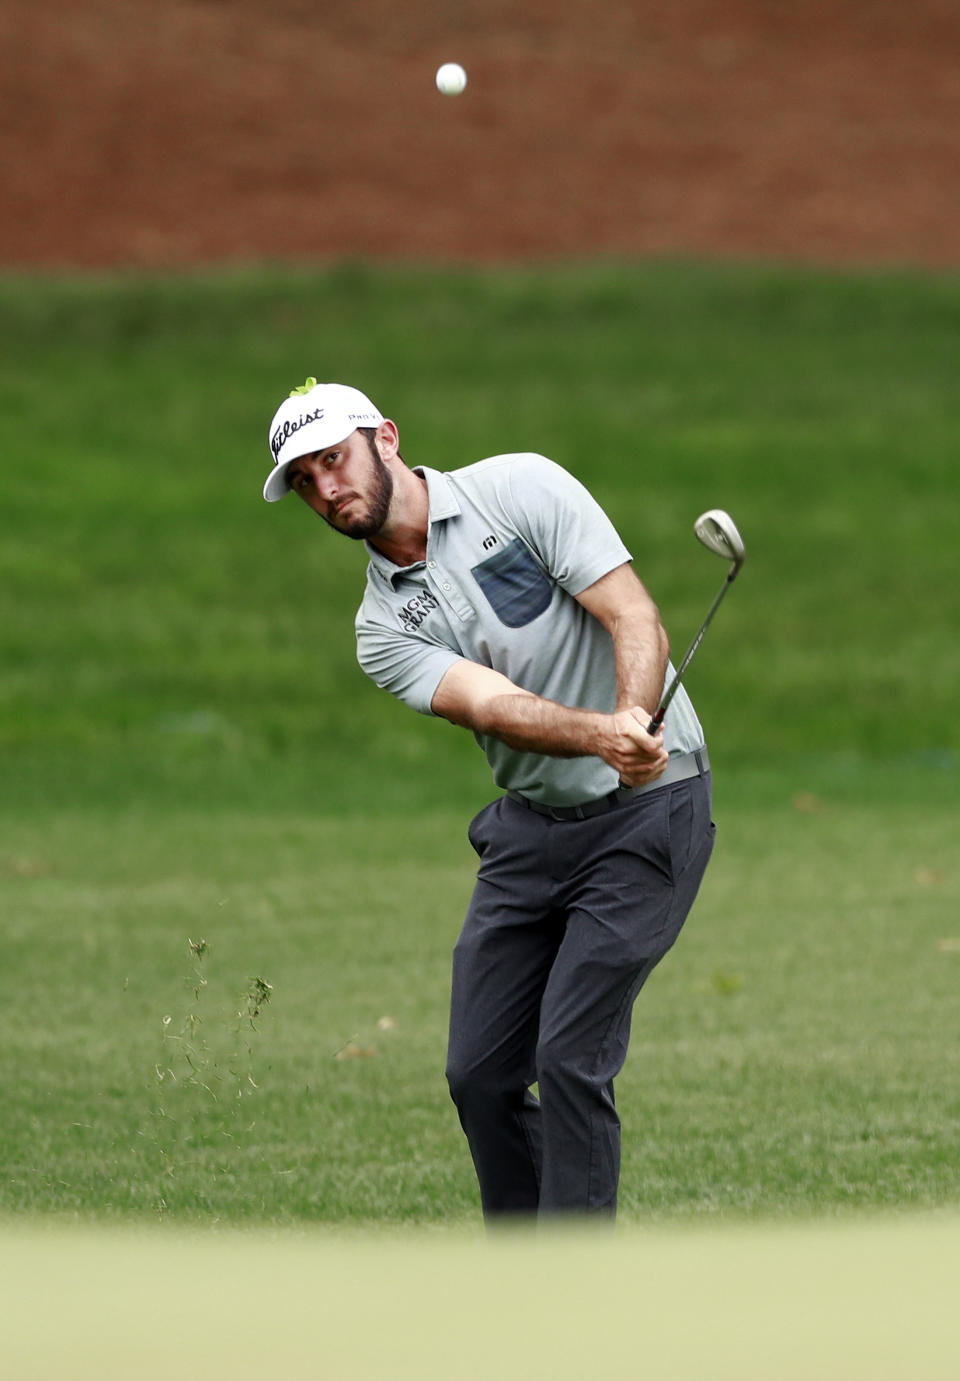 Max Homa chips to the second hole during the final round of the Wells Fargo Championship golf tournament at Quail Hollow Club in Charlotte, N.C., Sunday, May 5, 2019. (AP Photo/Jason E. Miczek)